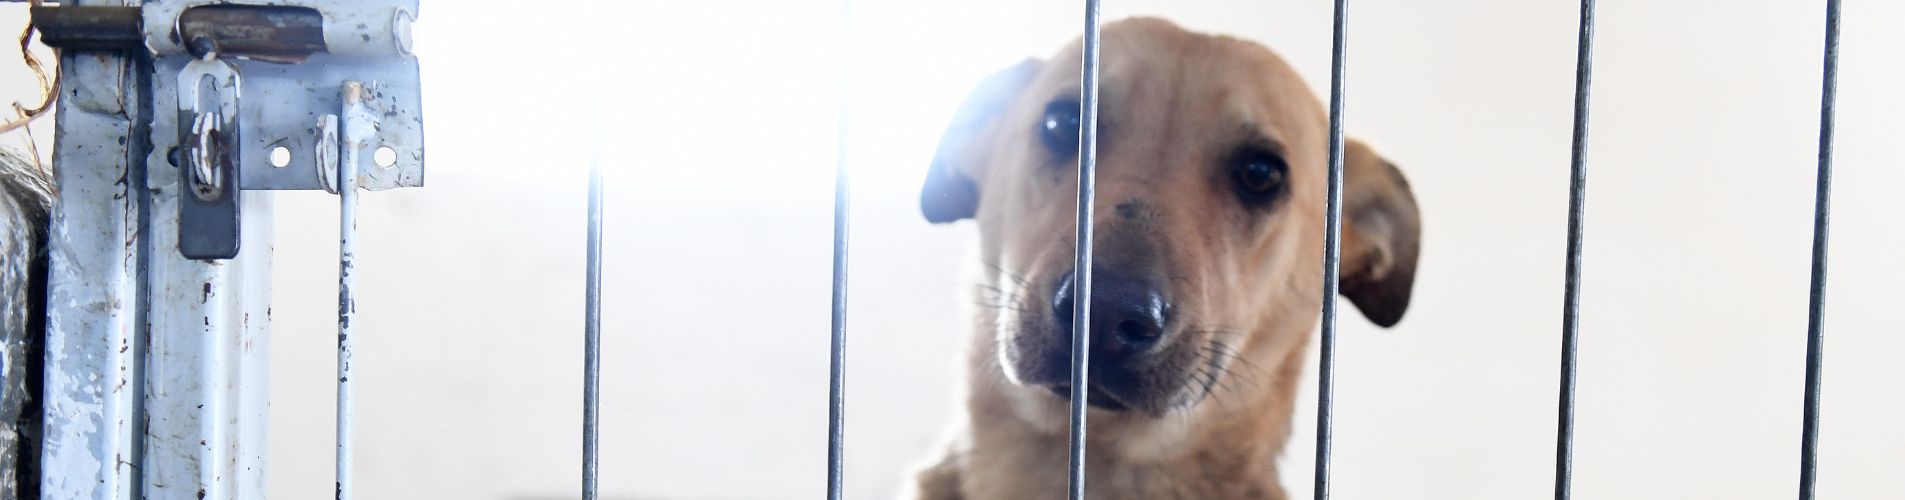 Image shows dog in kennel